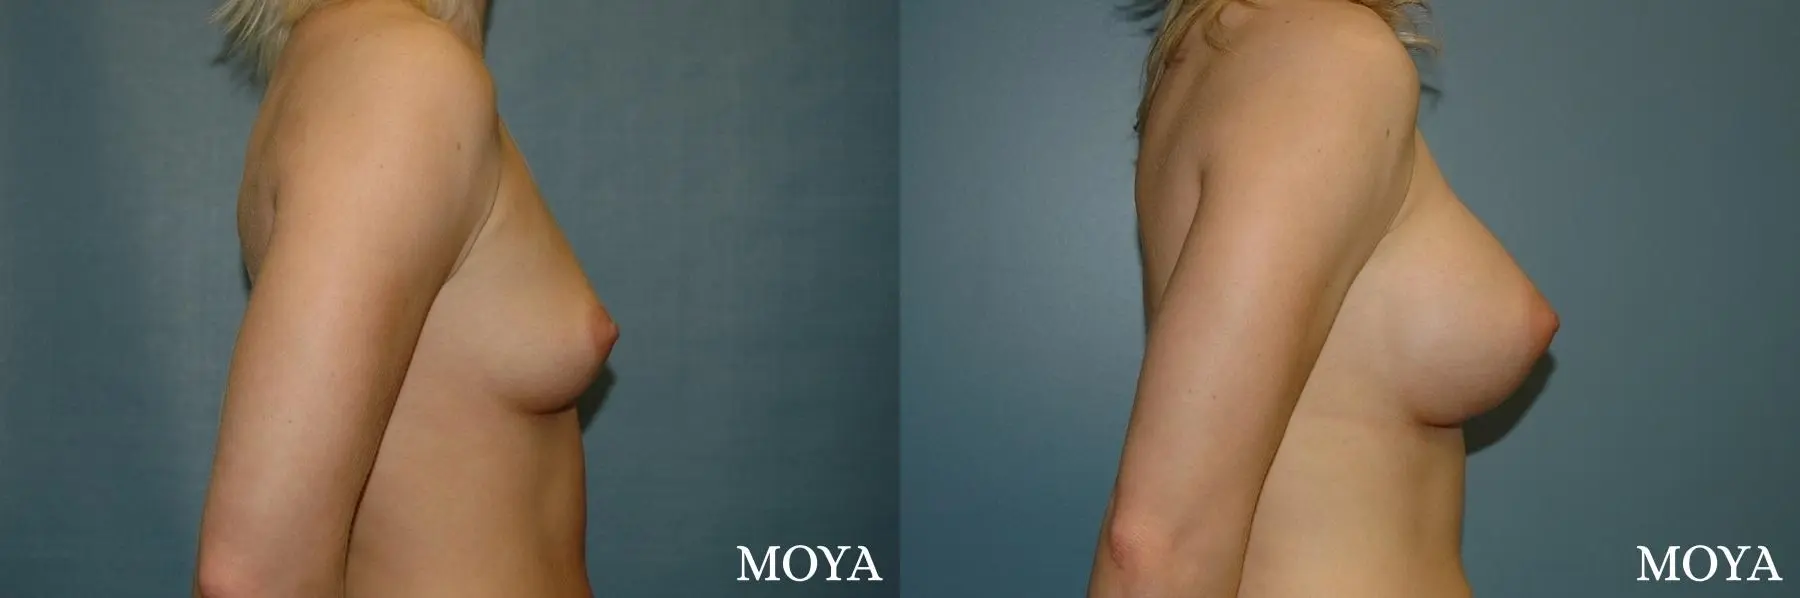 Breast Augmentation: Patient 3 - Before and After 2